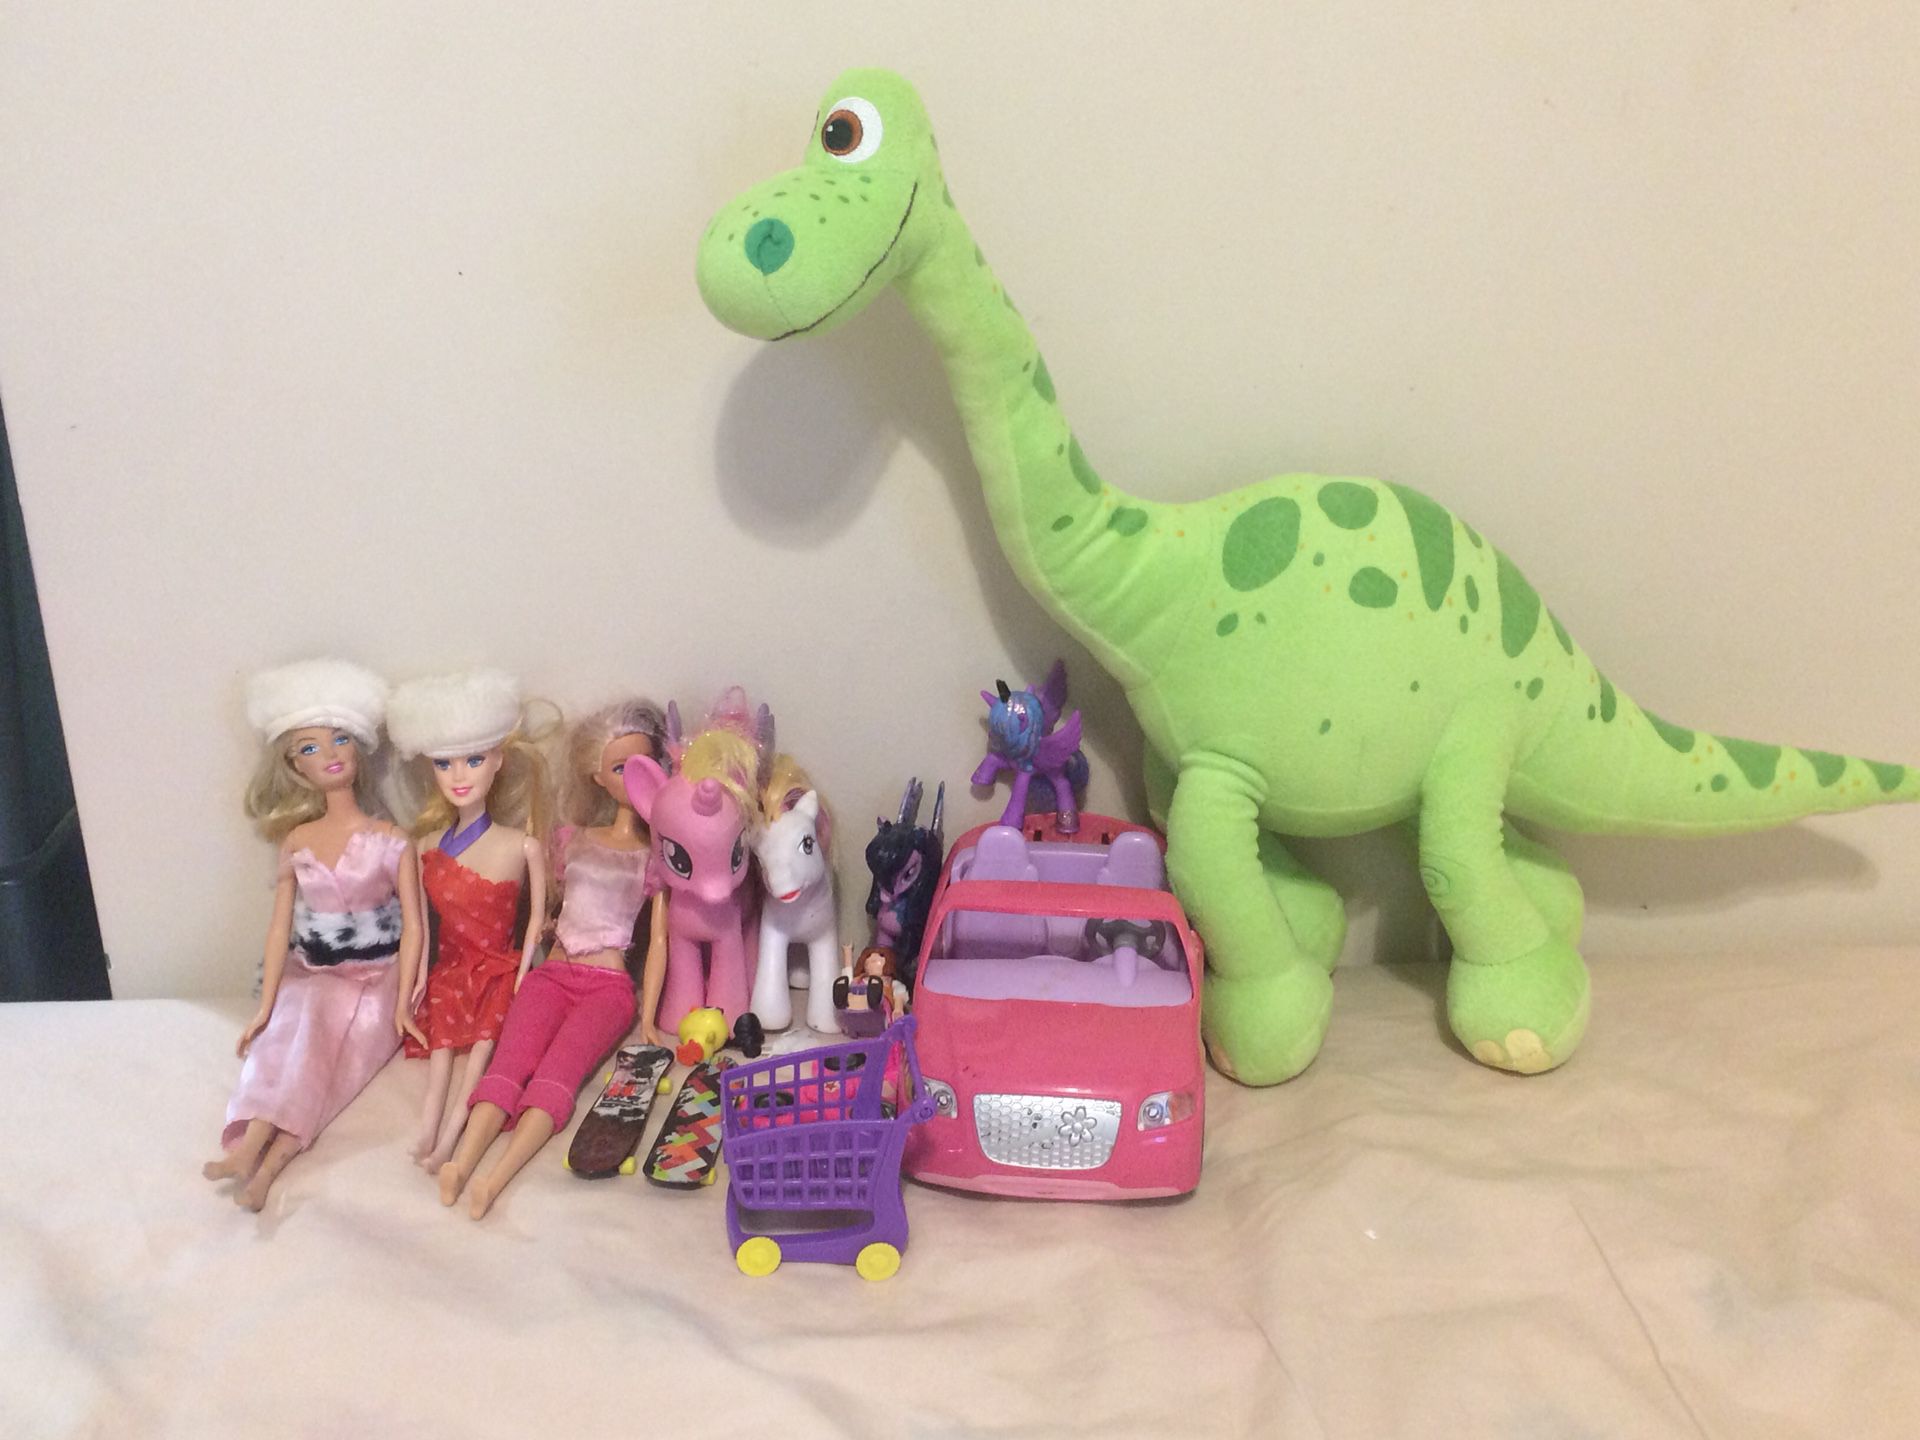 Dolls and barbie car with other toys